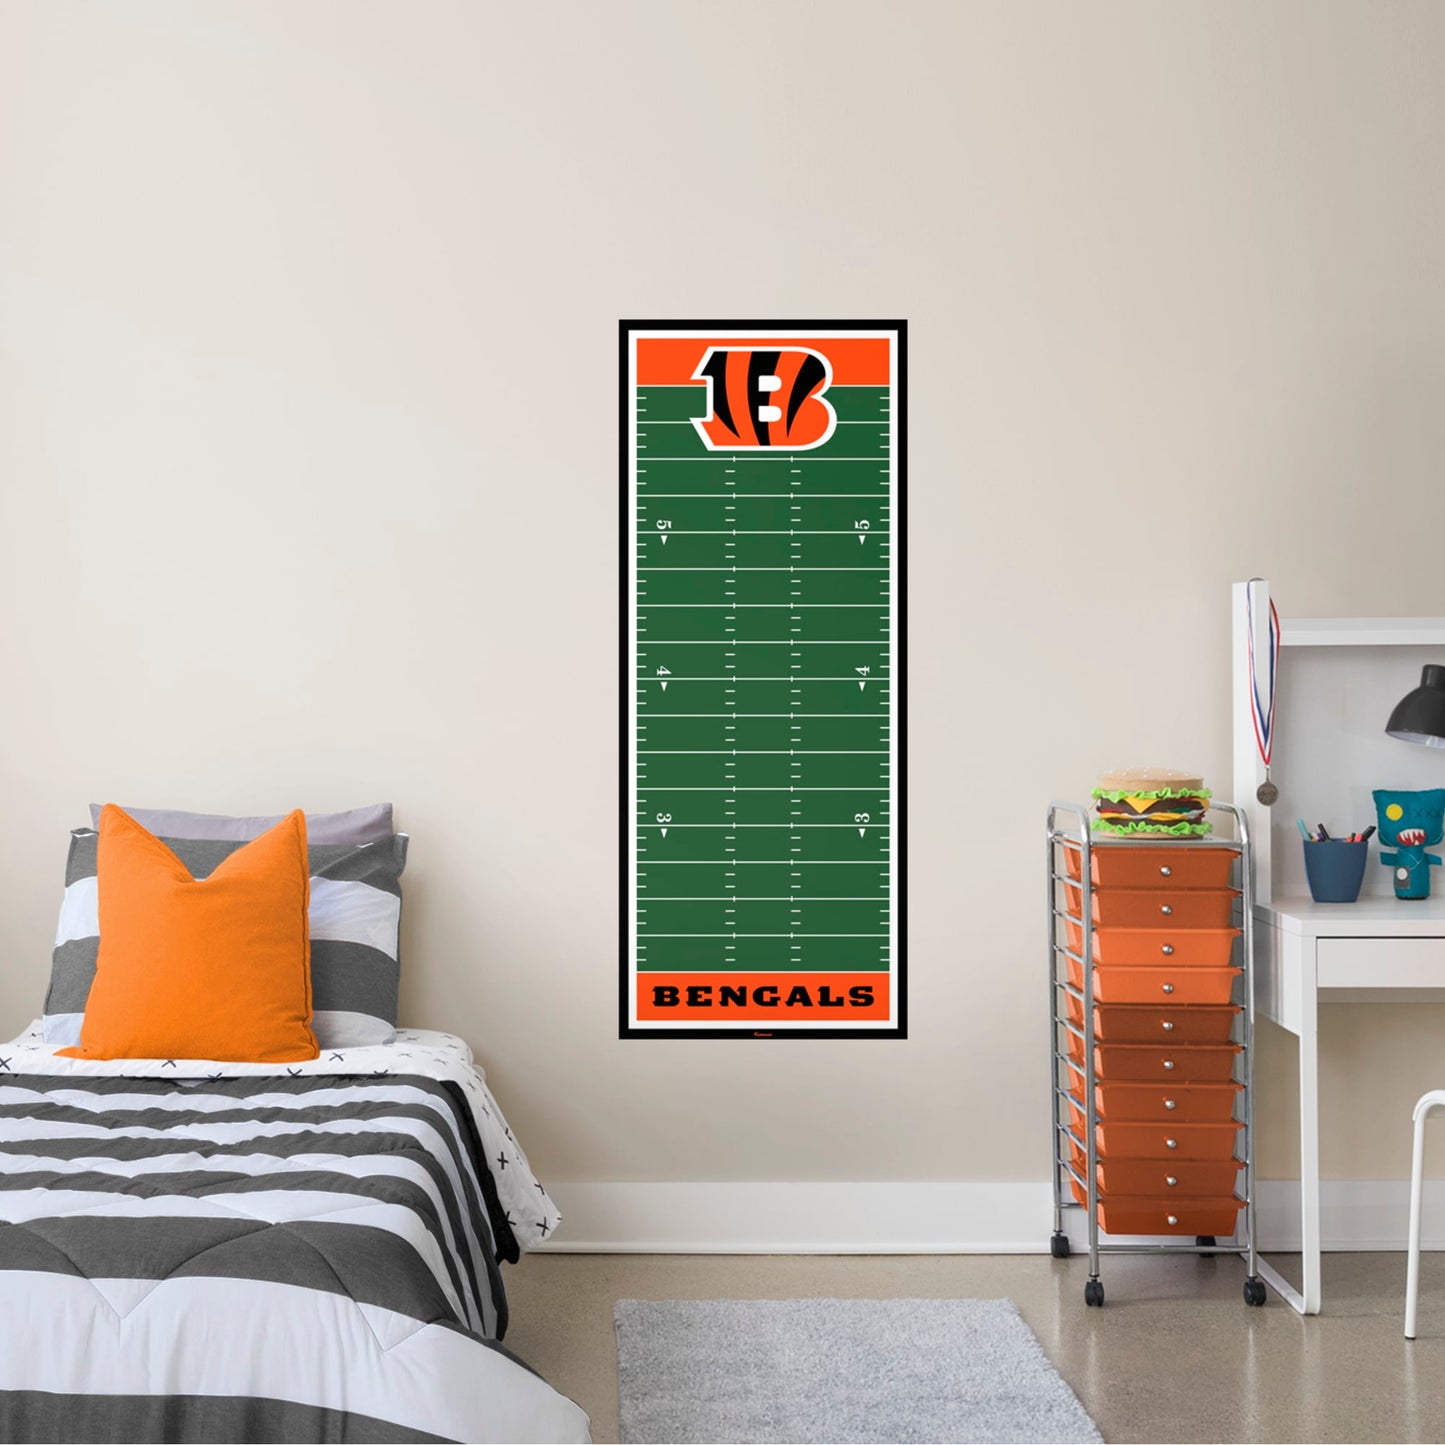 Cincinnati Bengals: Growth Chart - Officially Licensed NFL Removable Wall Graphic